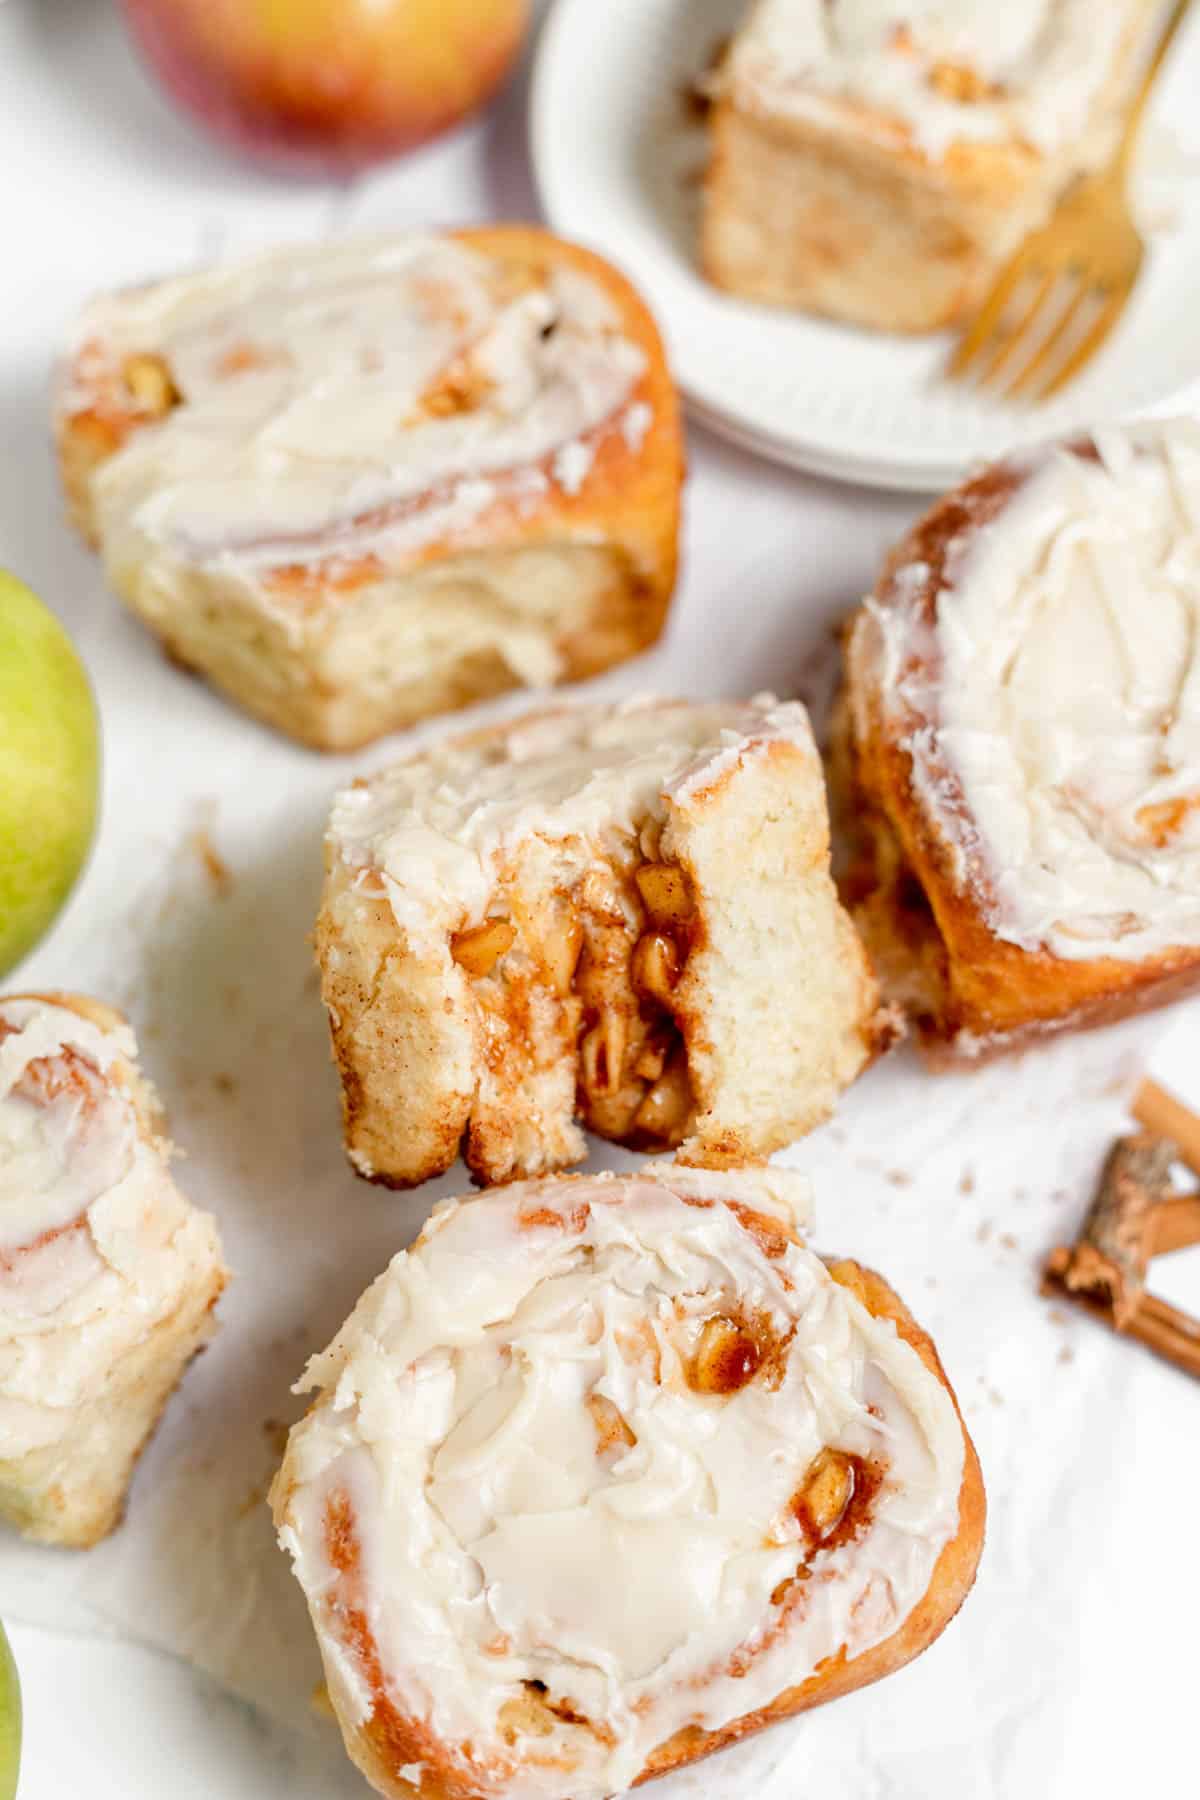 An image of apple cinnamon rolls with a bite taken out of one of them.